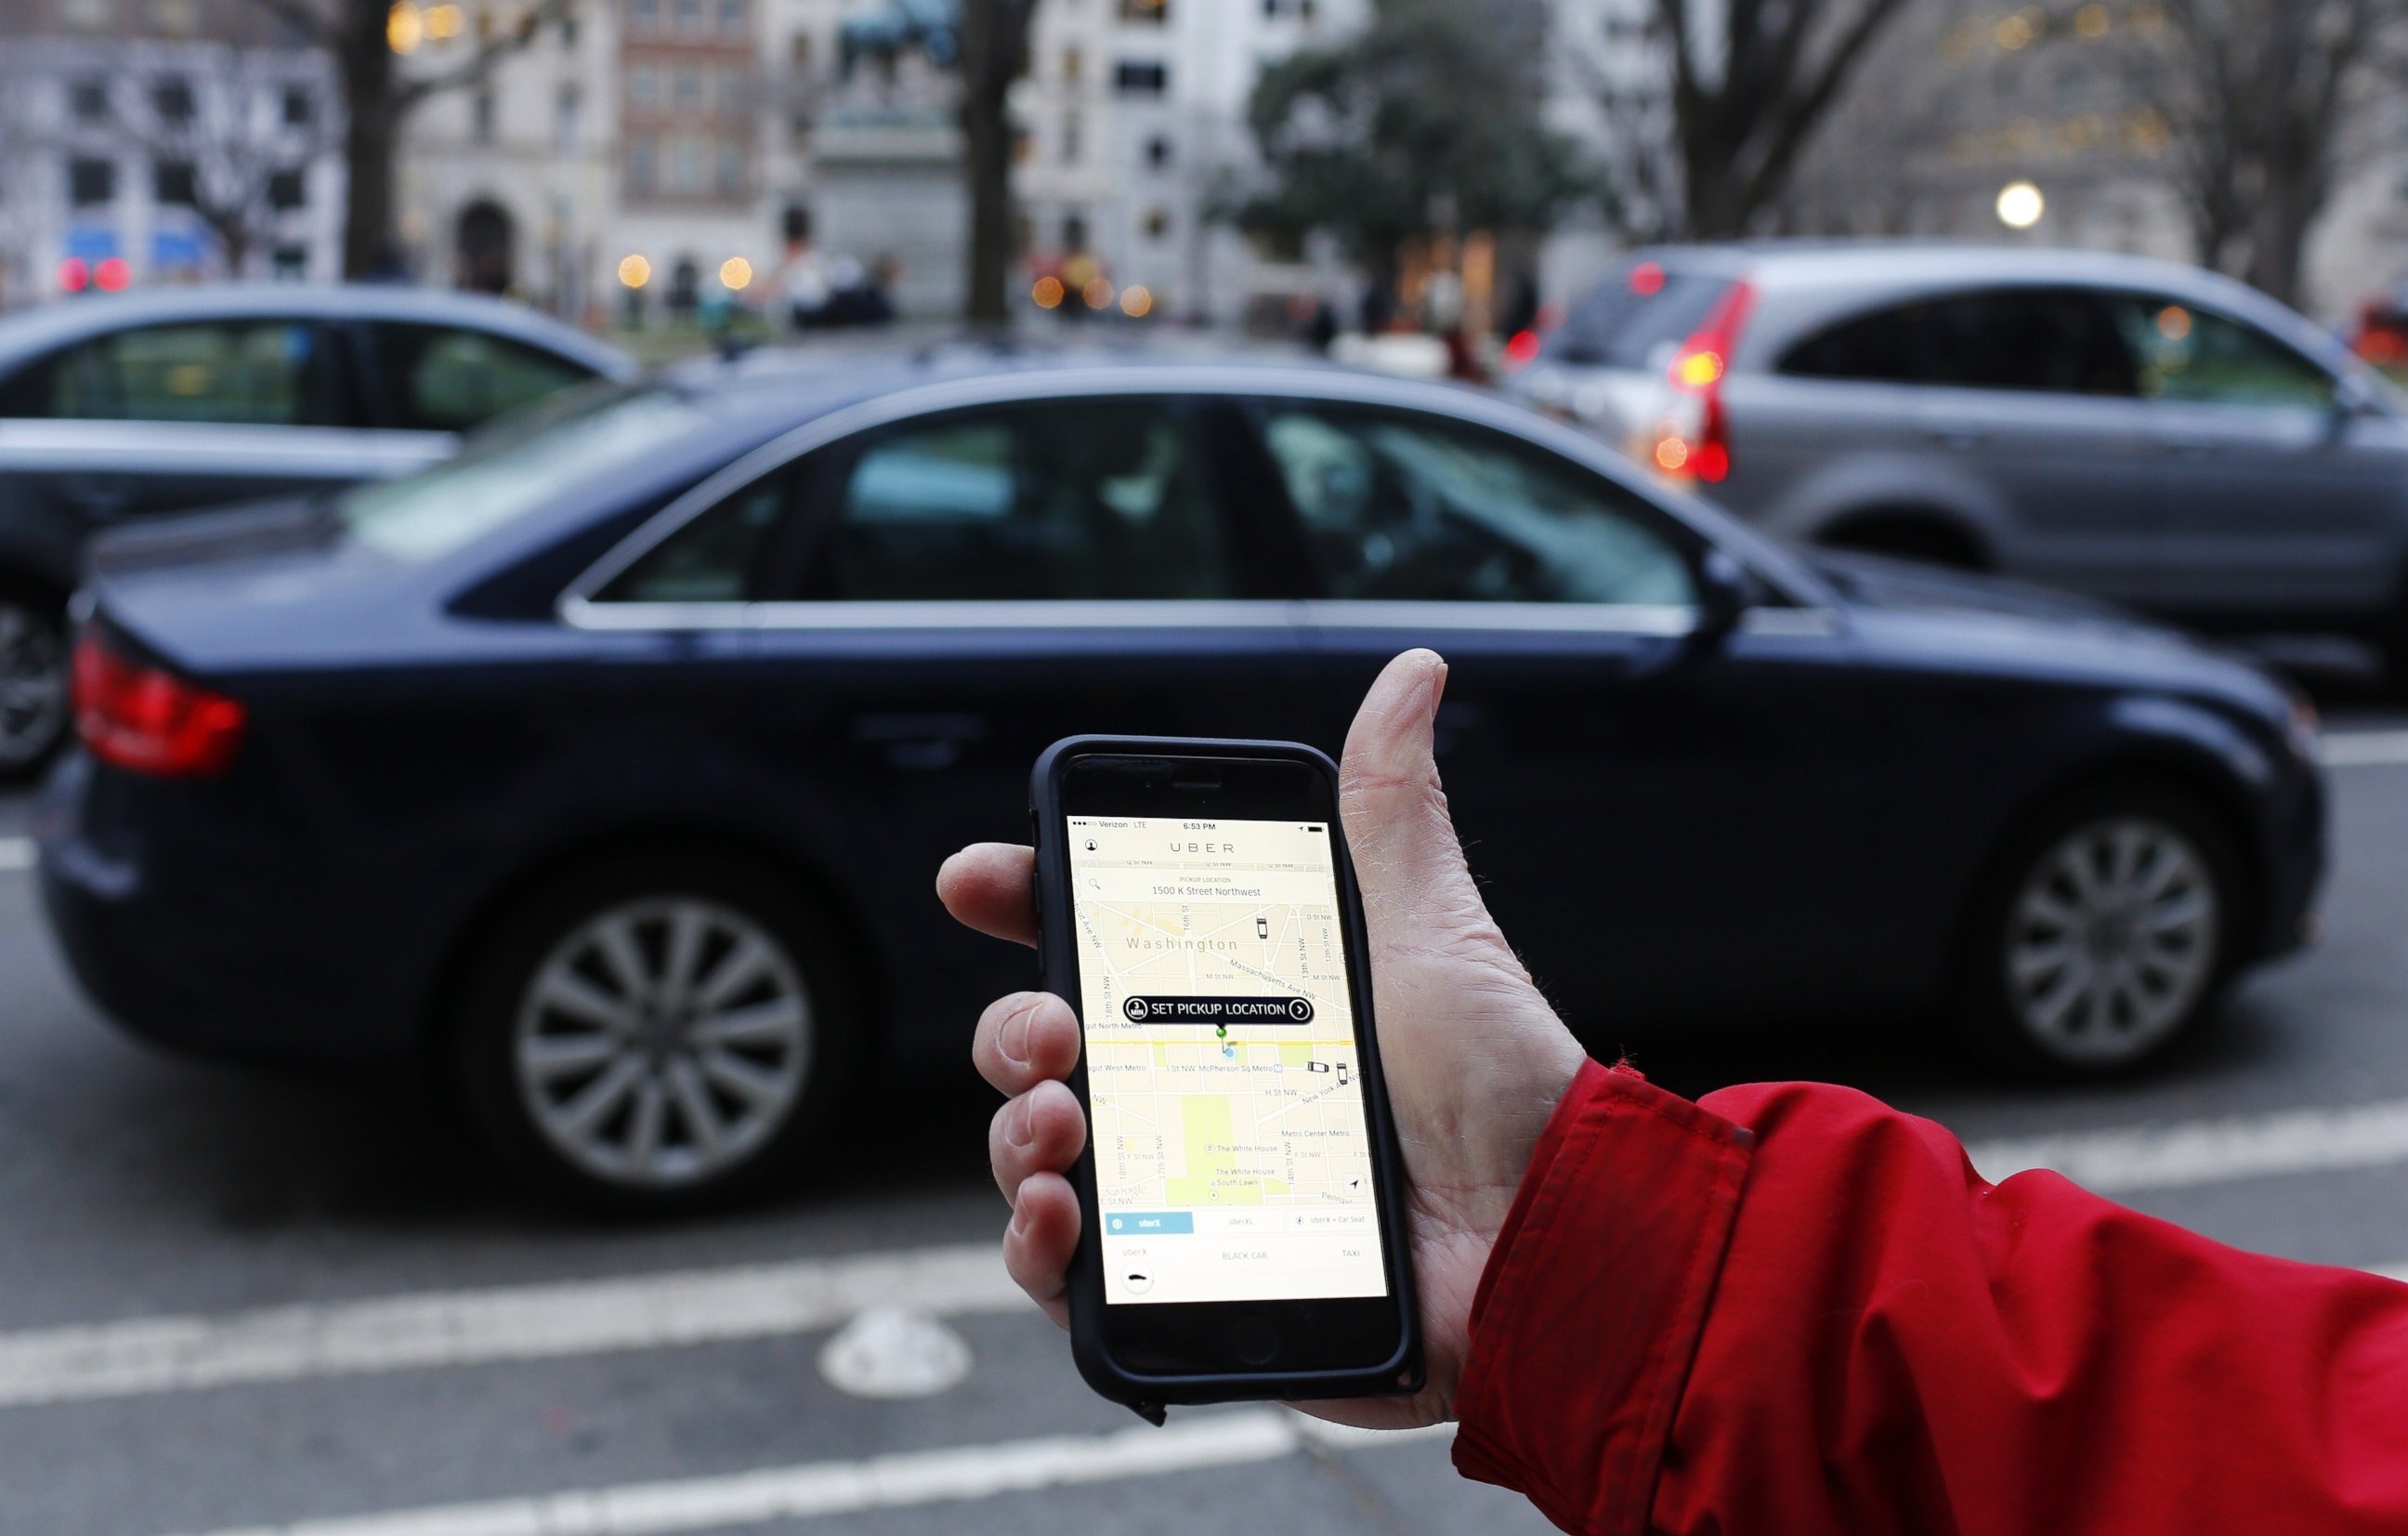 PHOTO: An UBER application is shown as cars drive by in Washington, DC on March 25, 2015.